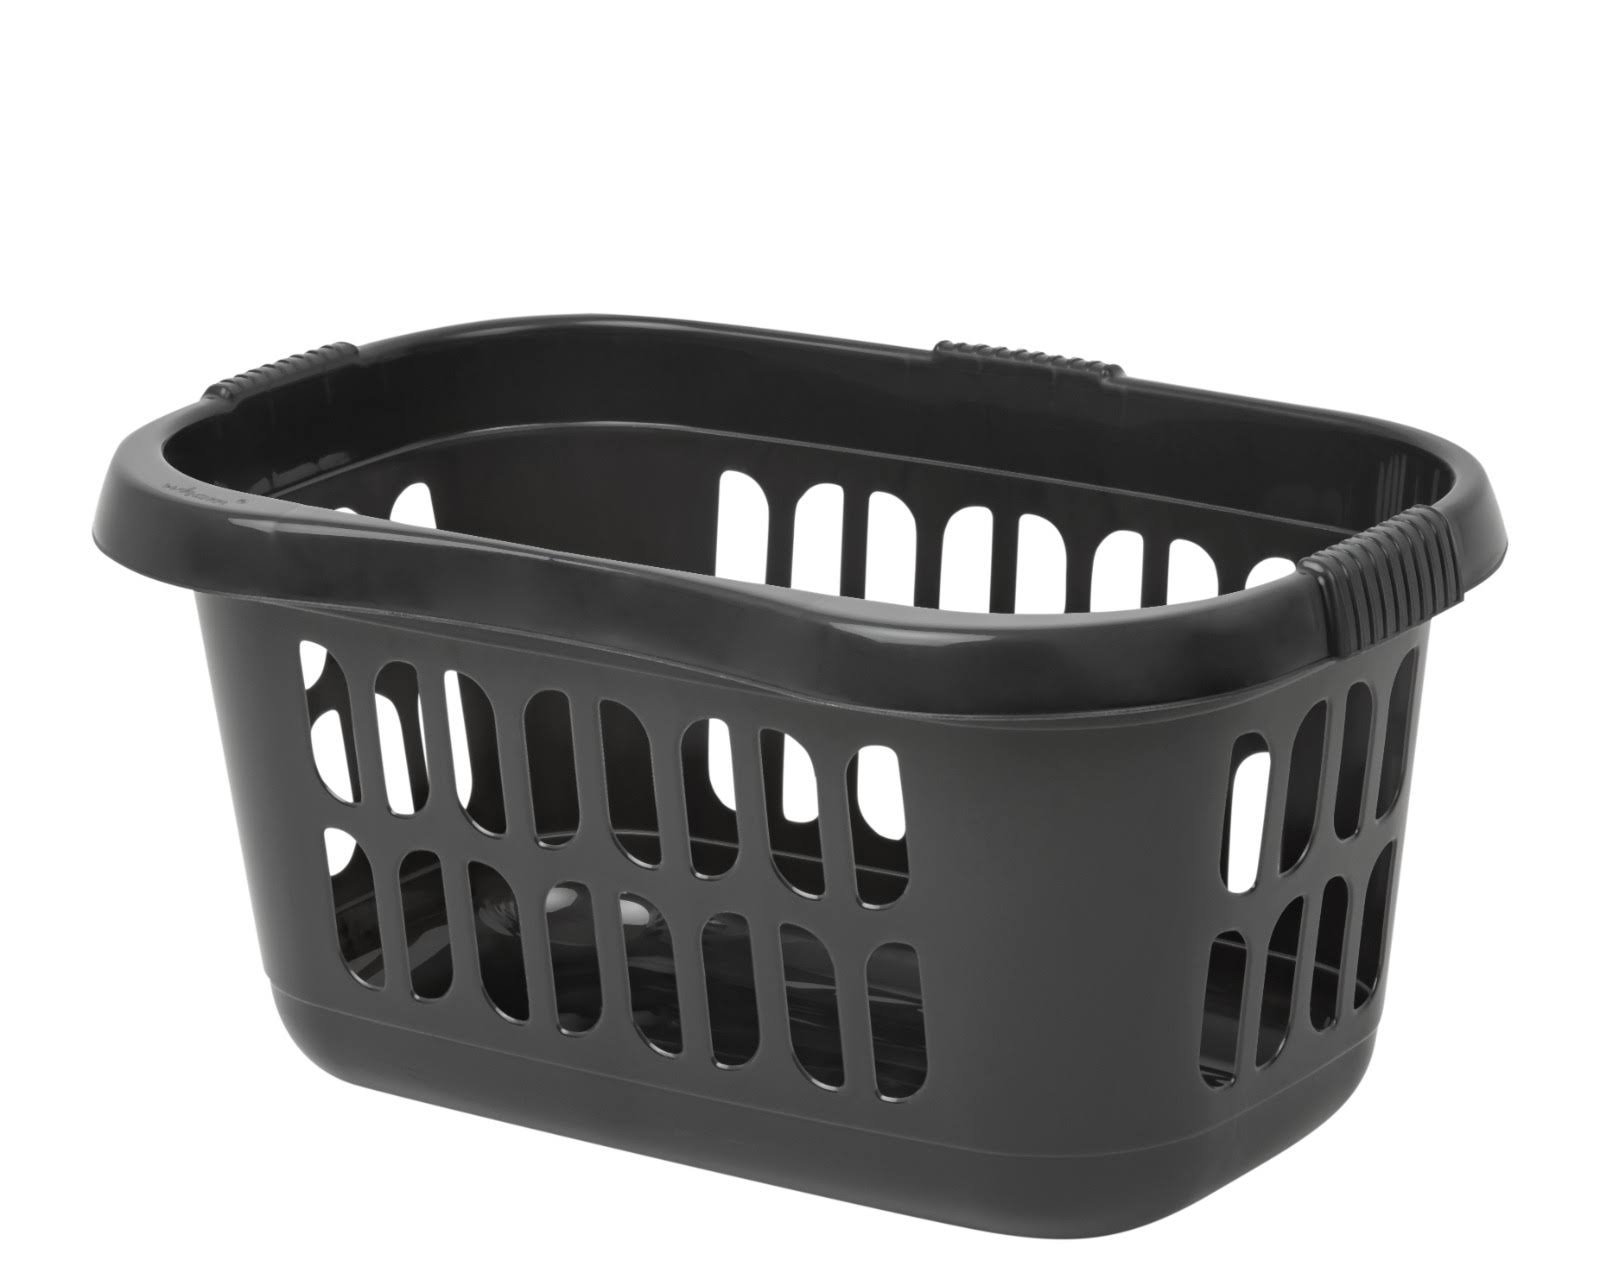 10 x Hipster Laundry Basket Midnight Black Storage Washing Clothes Linen Home